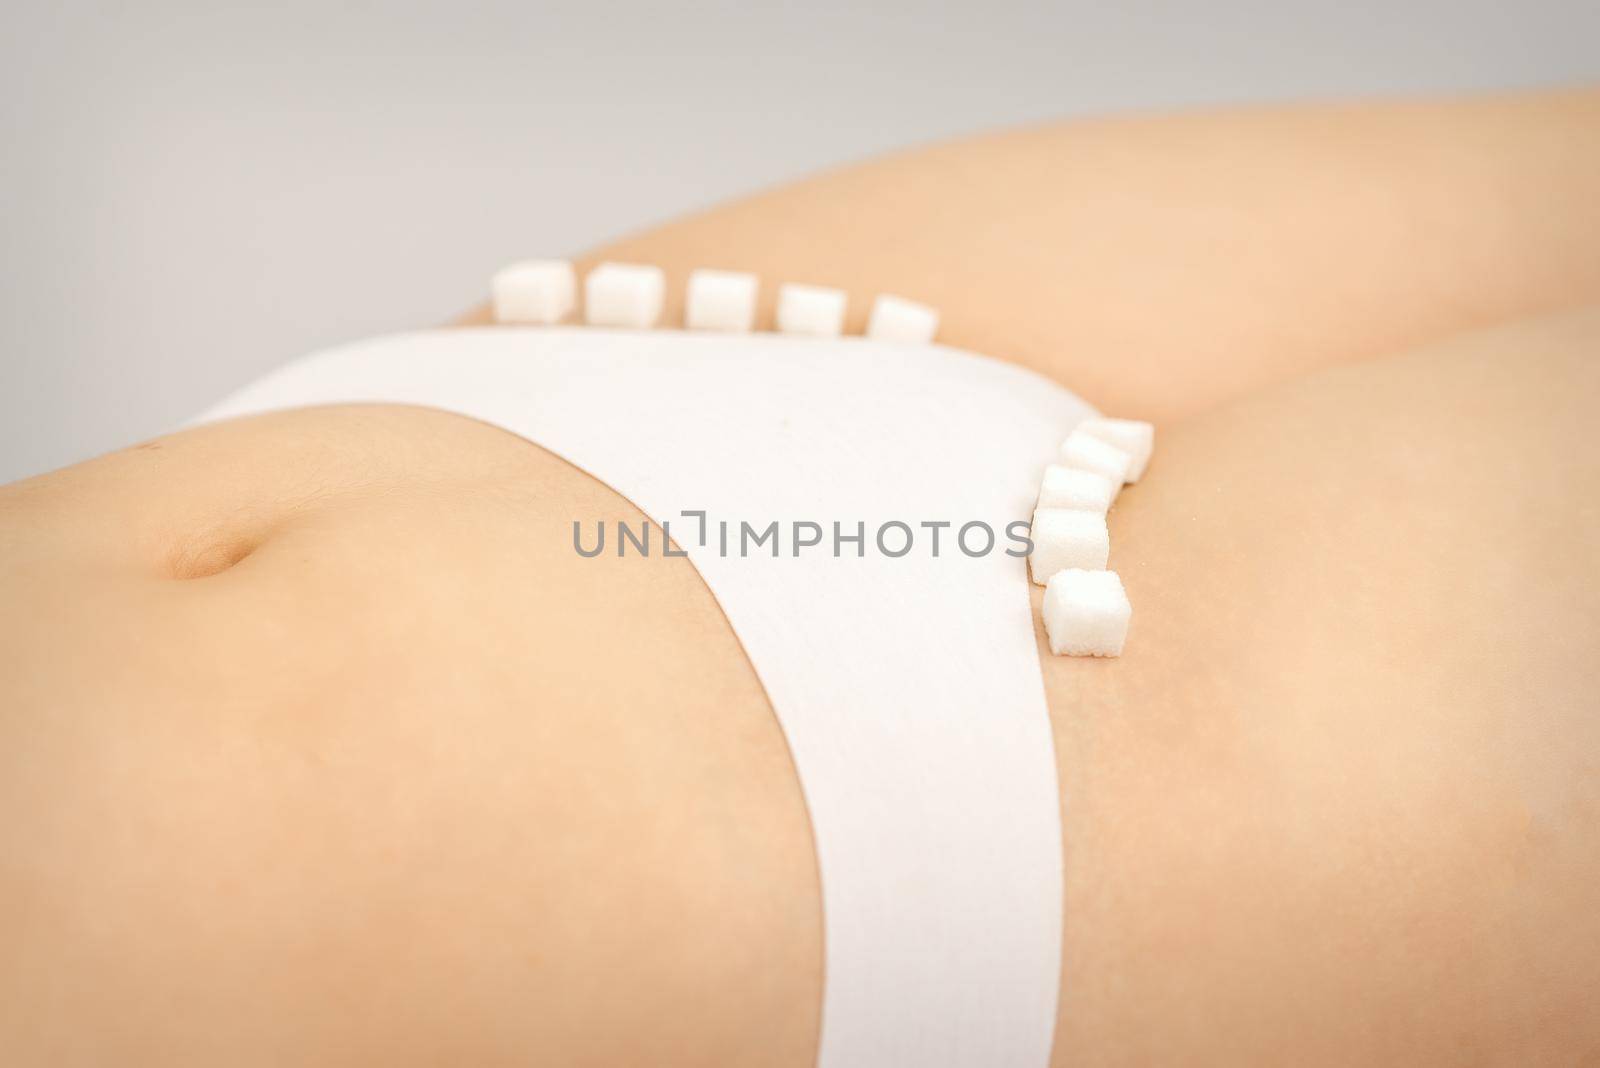 The concept of epilation, waxing, and intimate hygiene. Sugar cubes lying in a row on the bikini zone of a young white woman, close up